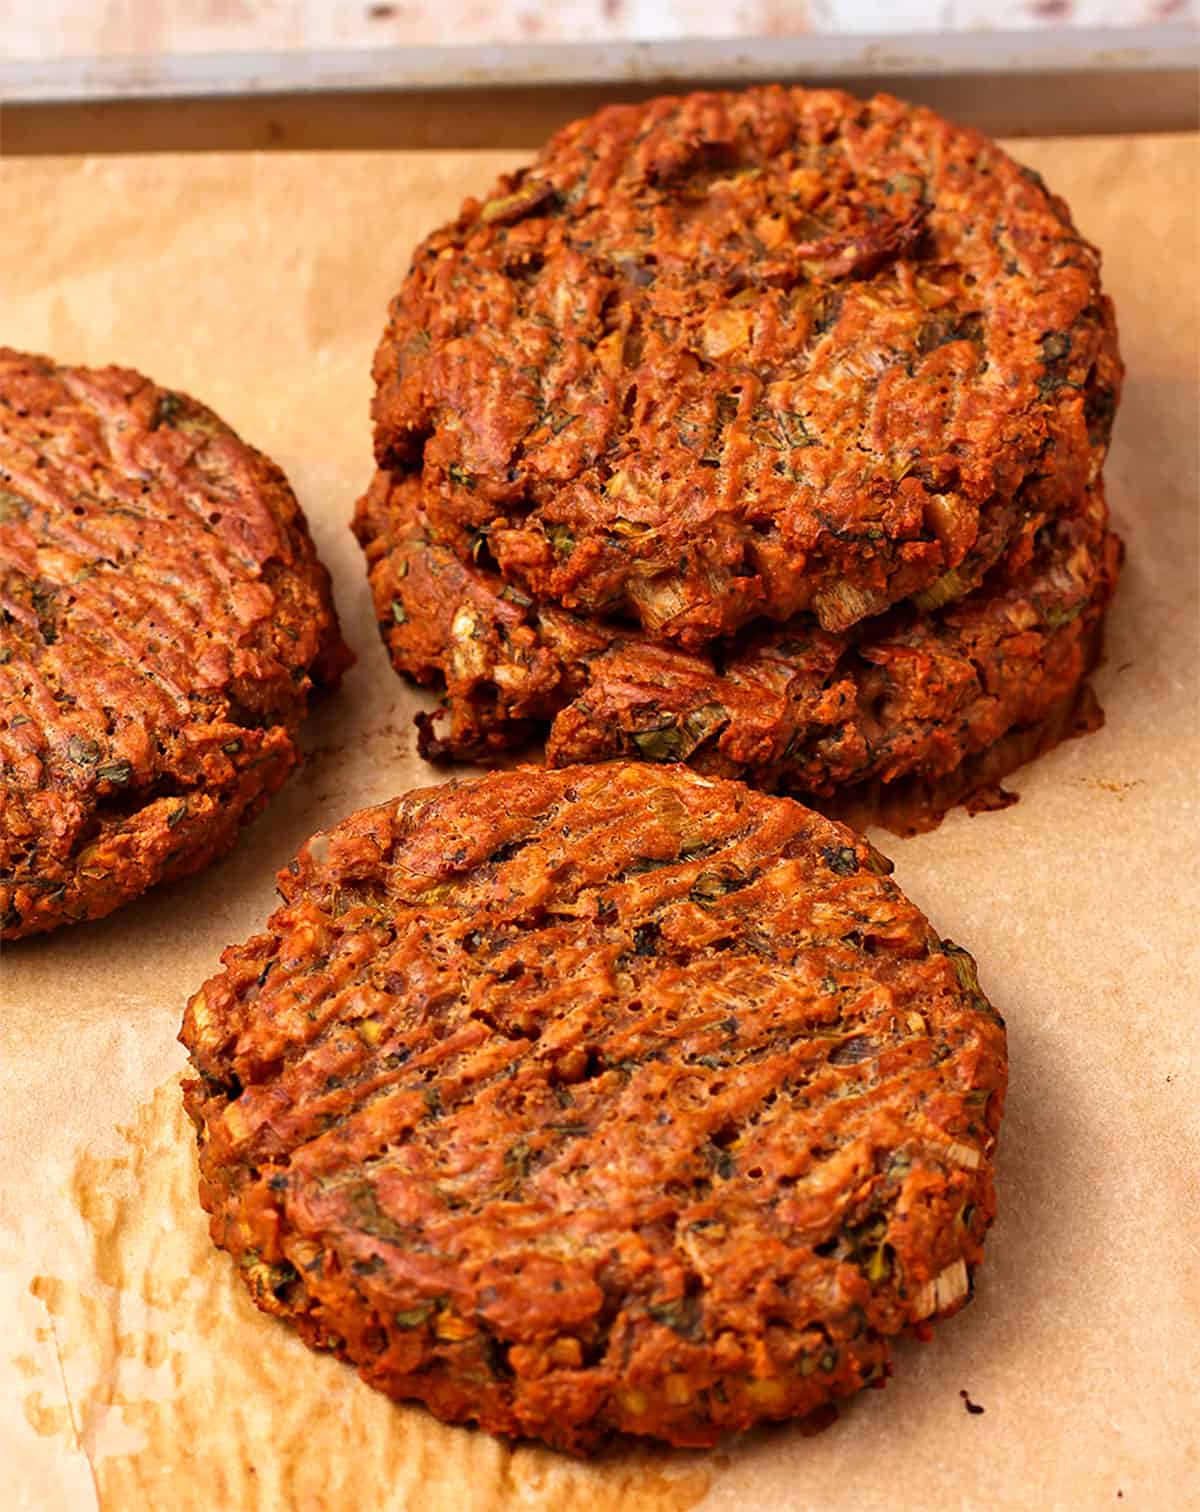 Baked tofu burger patties on parchment paper.